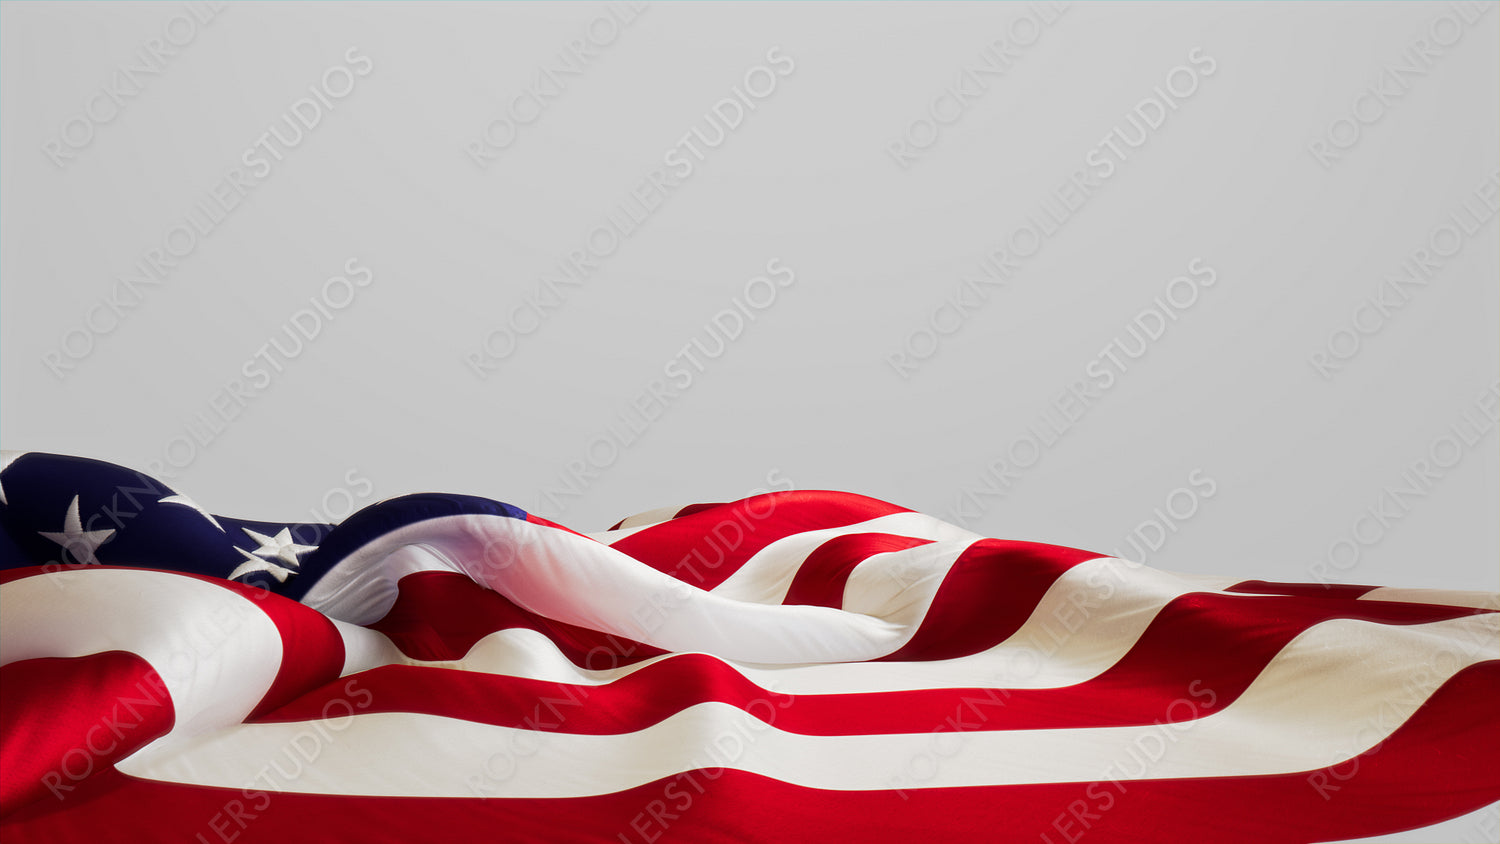 Premium Banner for Veterans Day with USA Flag, Isolated on White Background with Copy-Space.